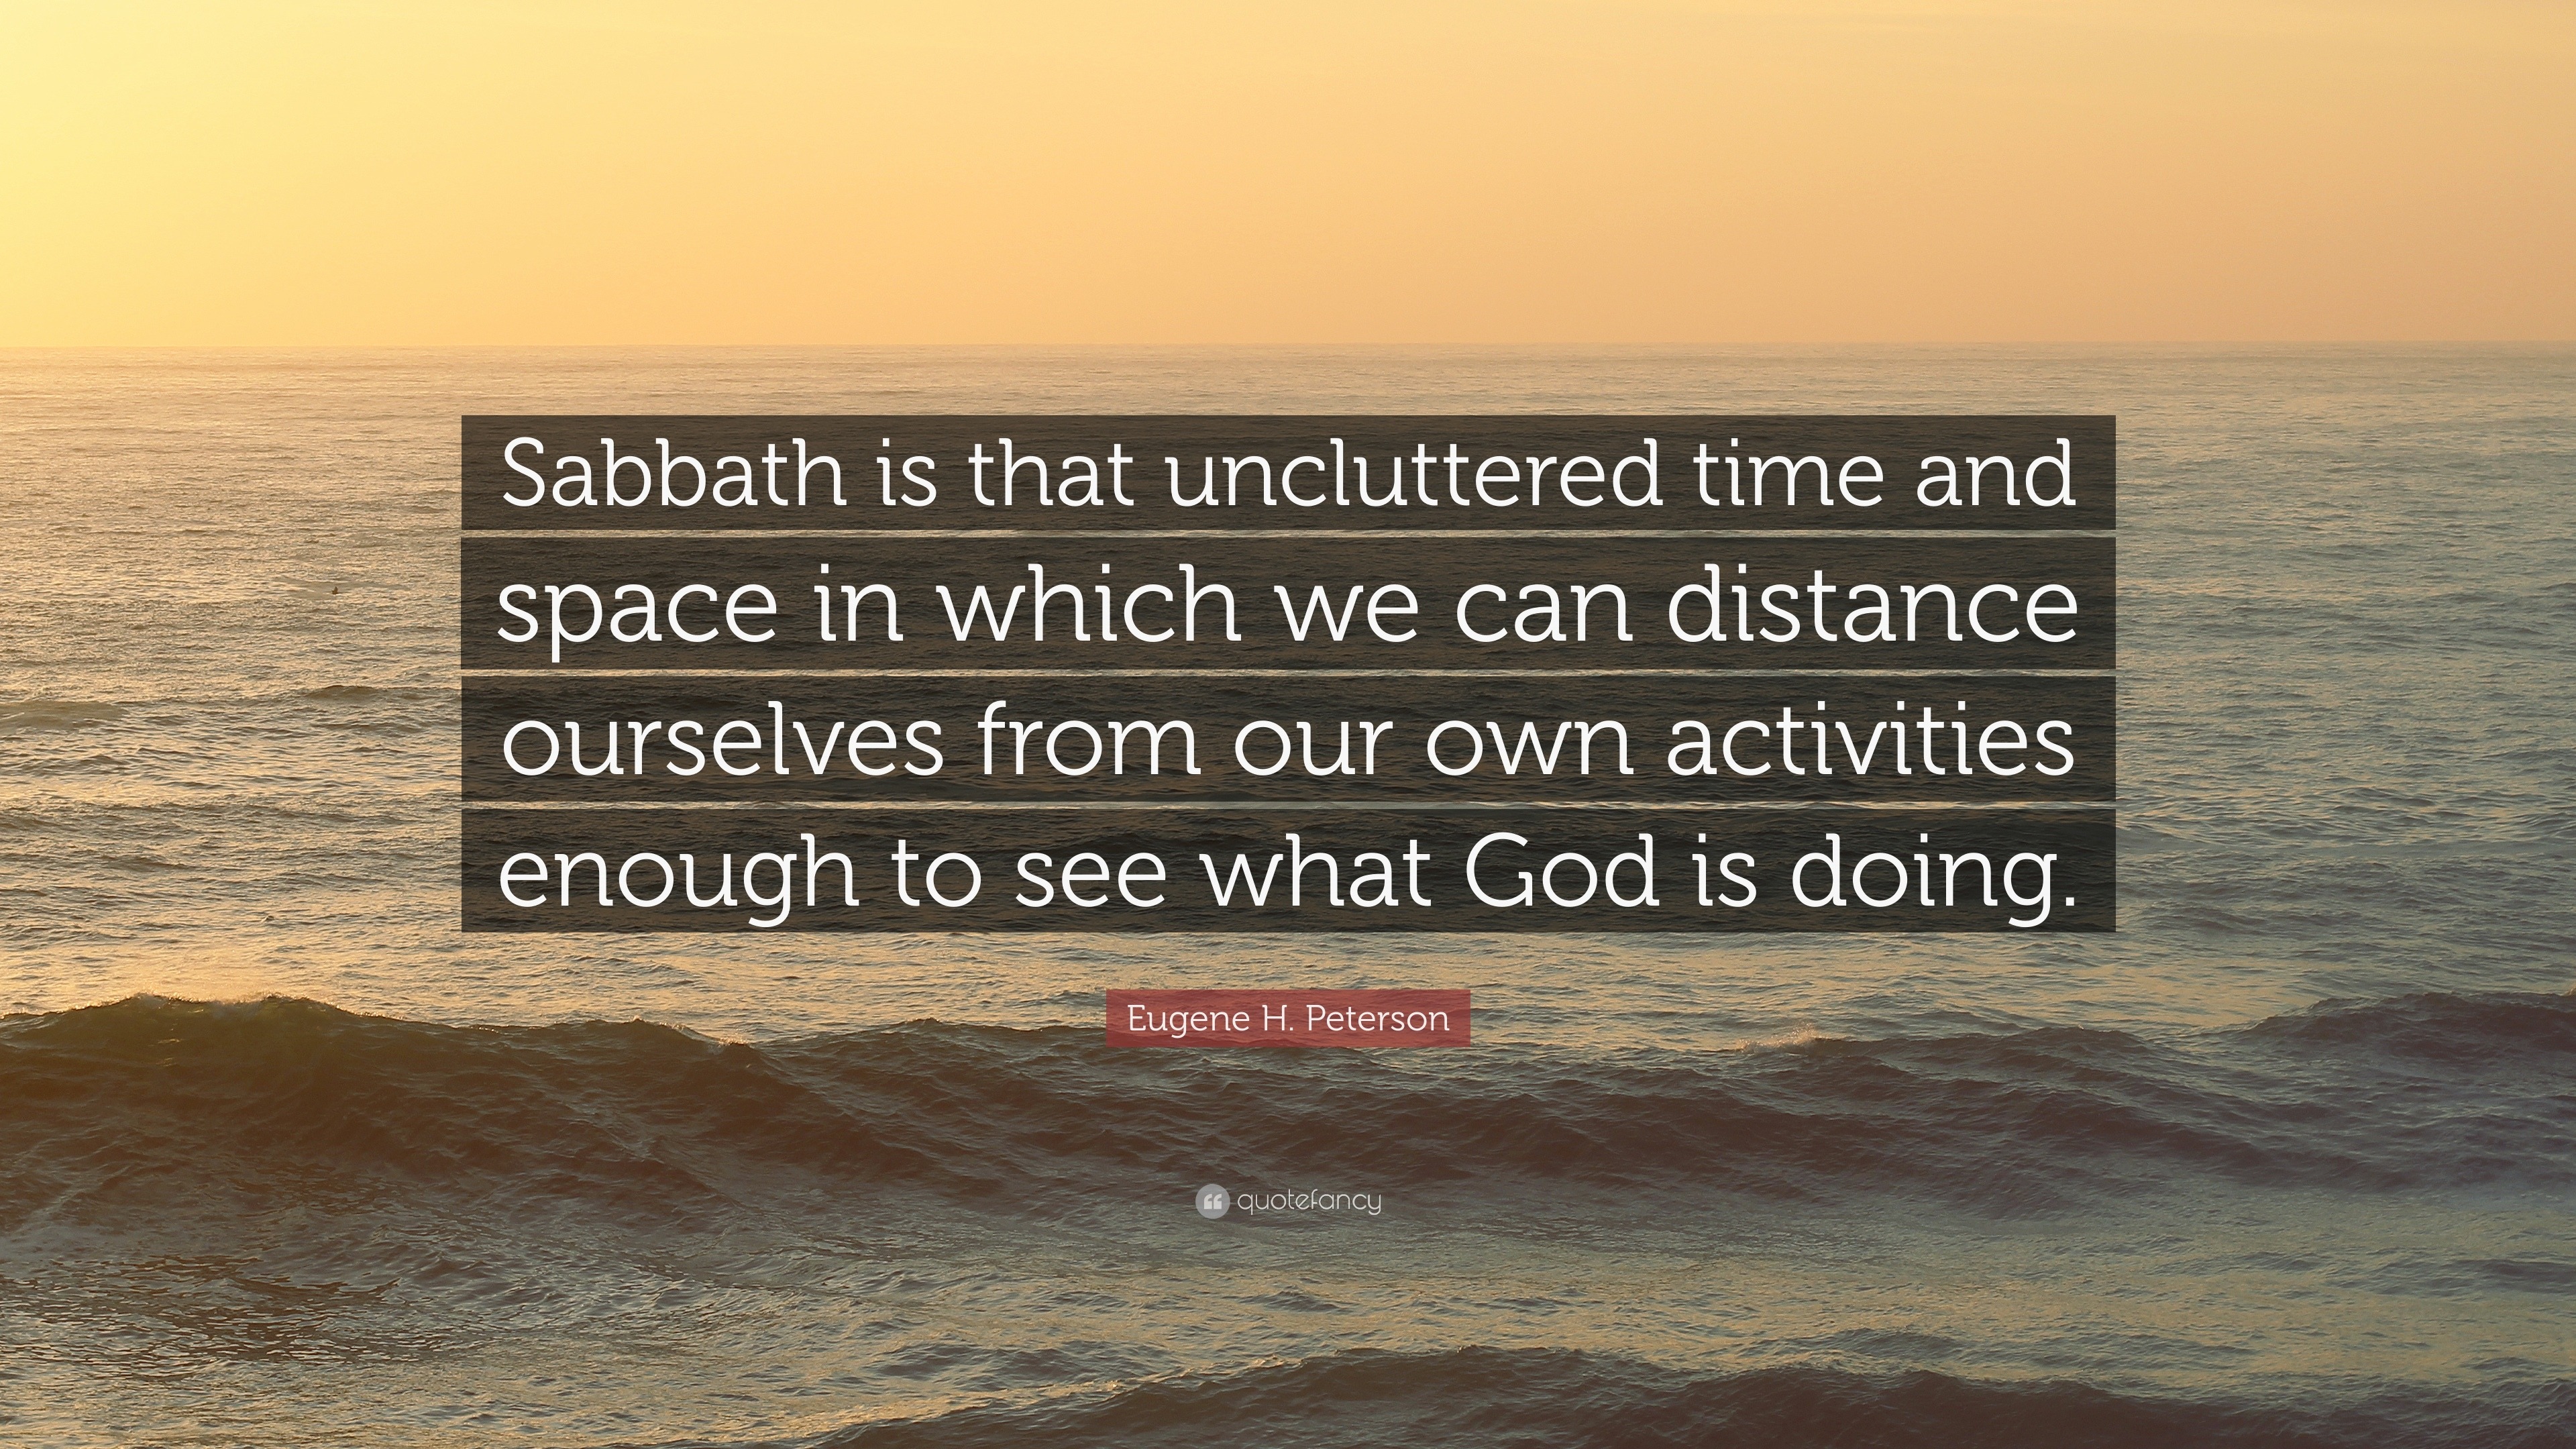 1742033-Eugene-H-Peterson-Quote-Sabbath-is-that-uncluttered-time-and-space.jpg